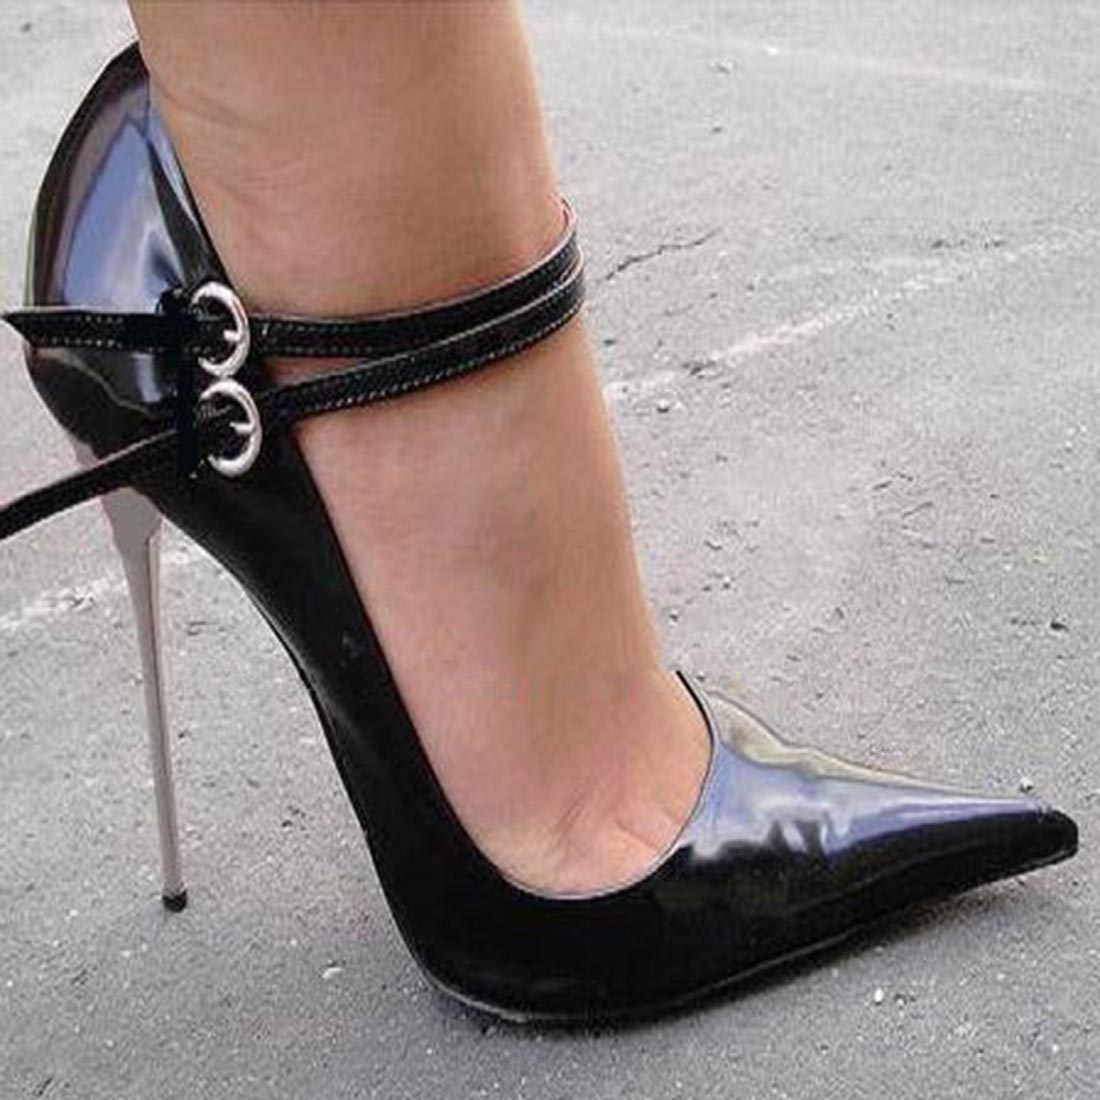 Buckle Thread Pointed Toe Stiletto Heel 14cm Thin Shoes